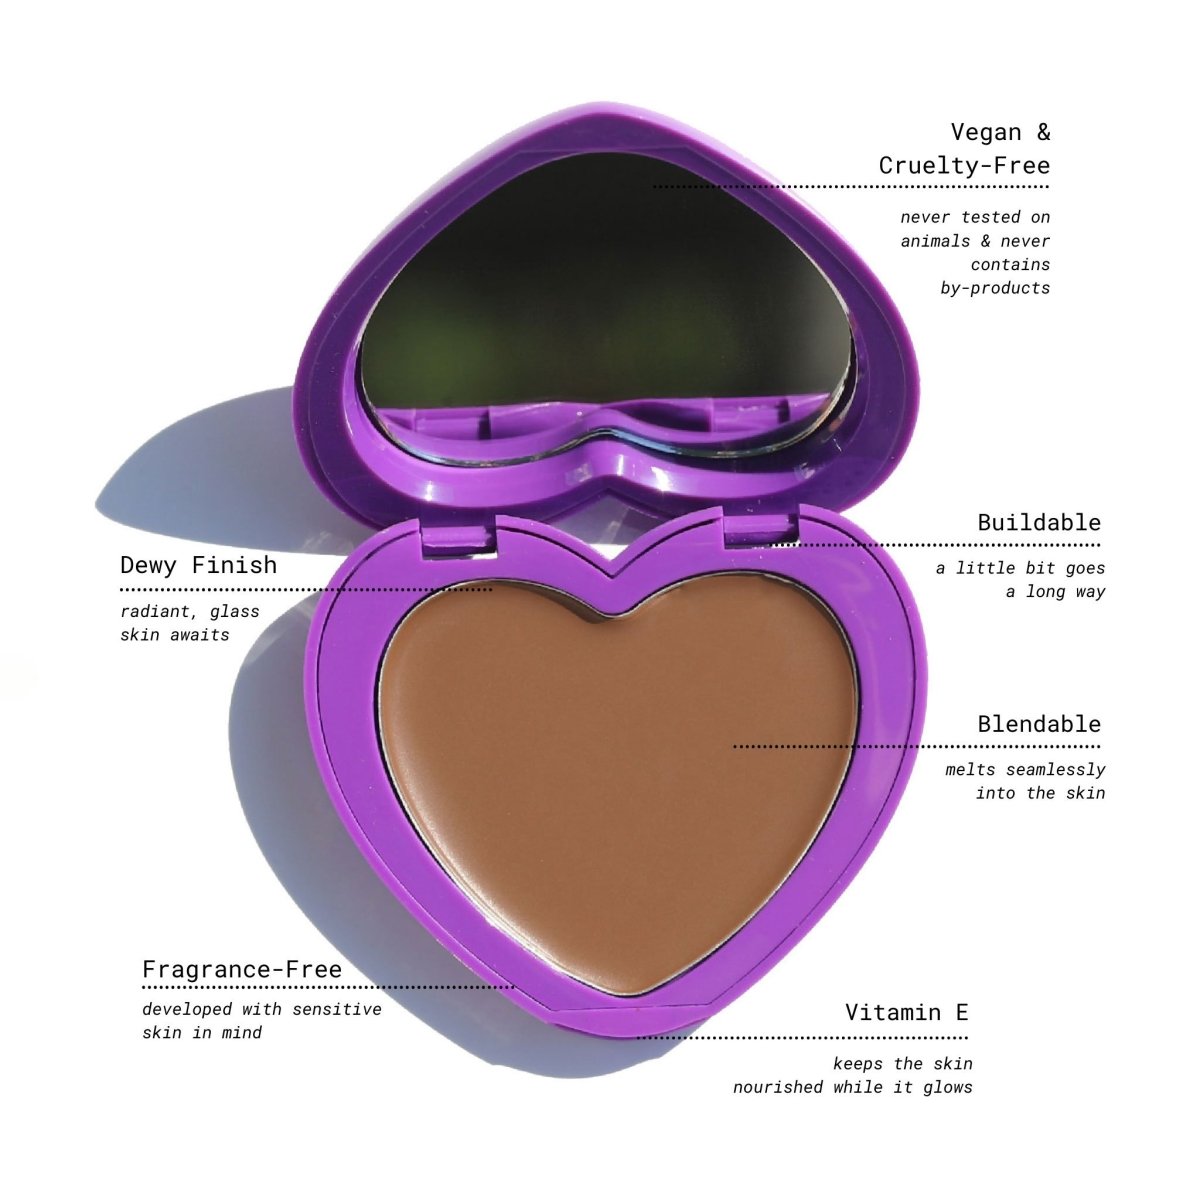 open purple heart-shaped compact with brown pan and key benefits - candy paint bronzer - half caked makeup